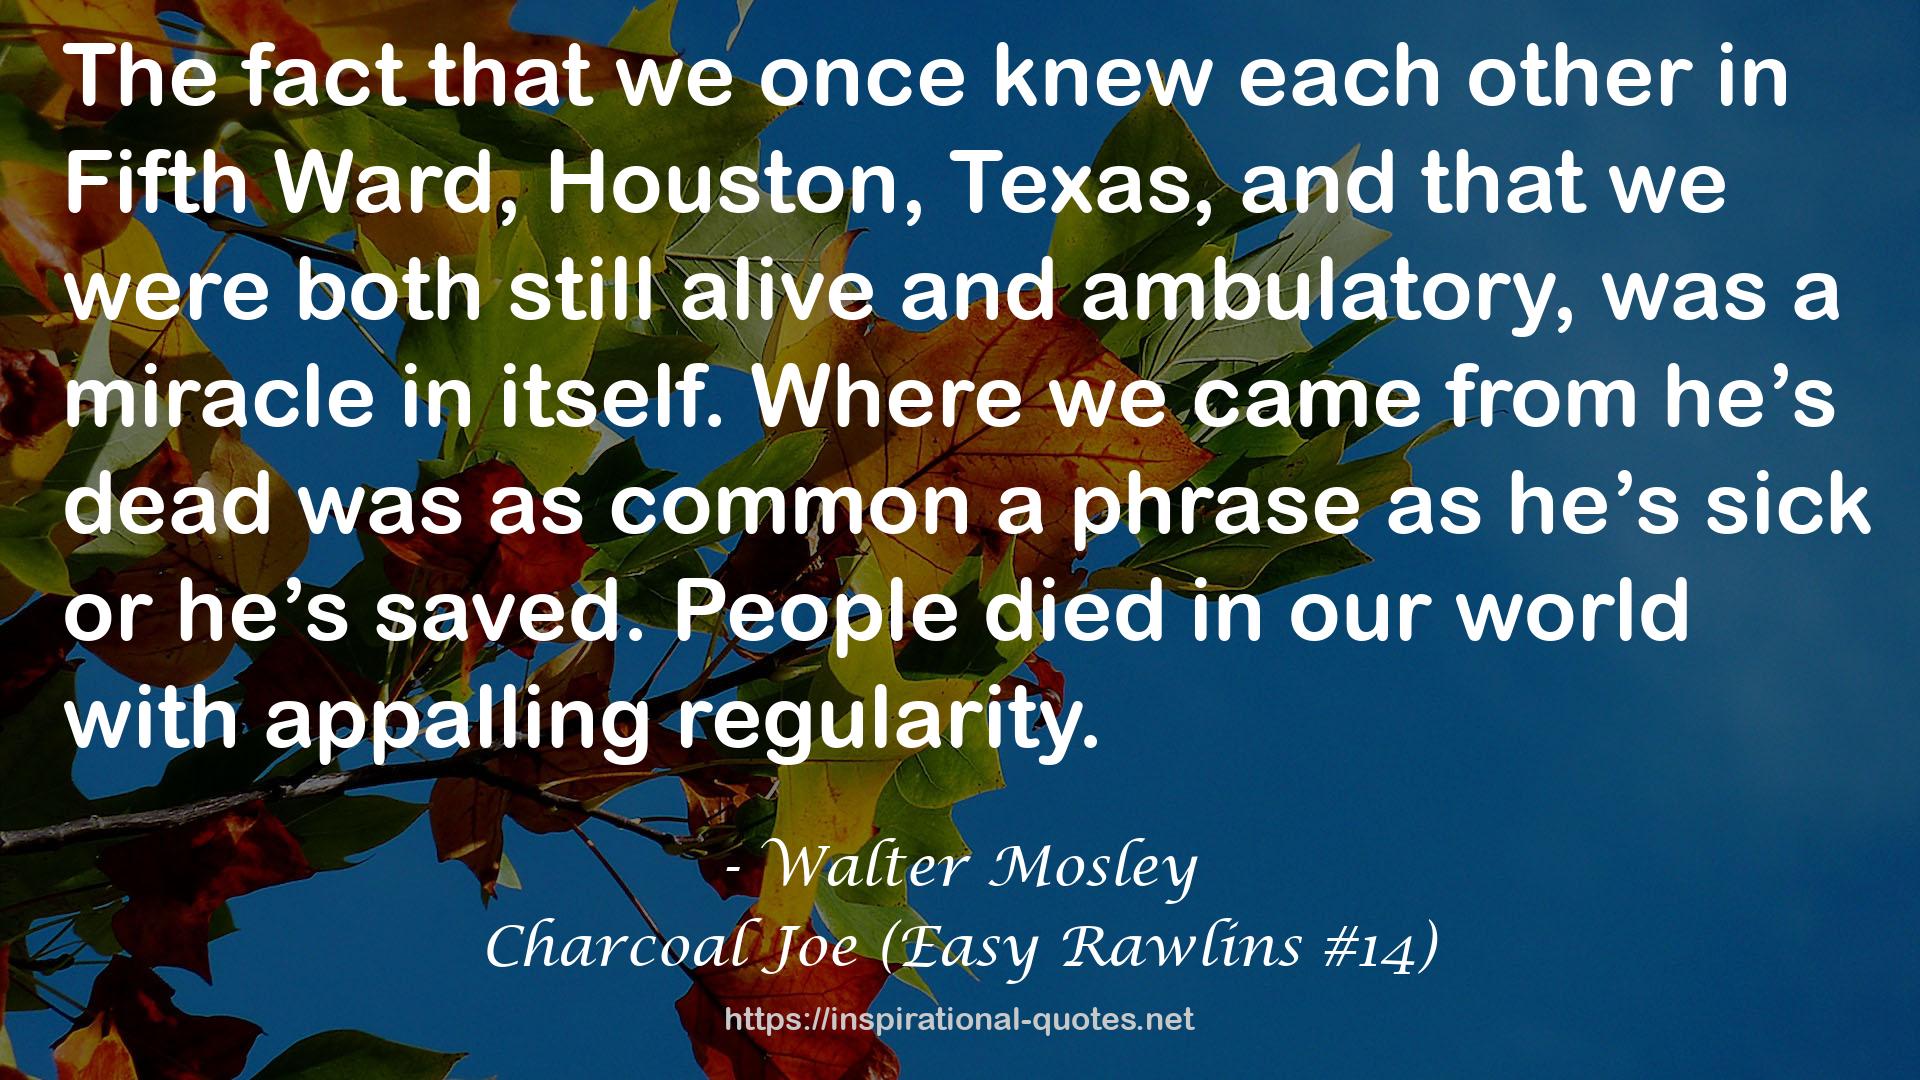 Walter Mosley QUOTES